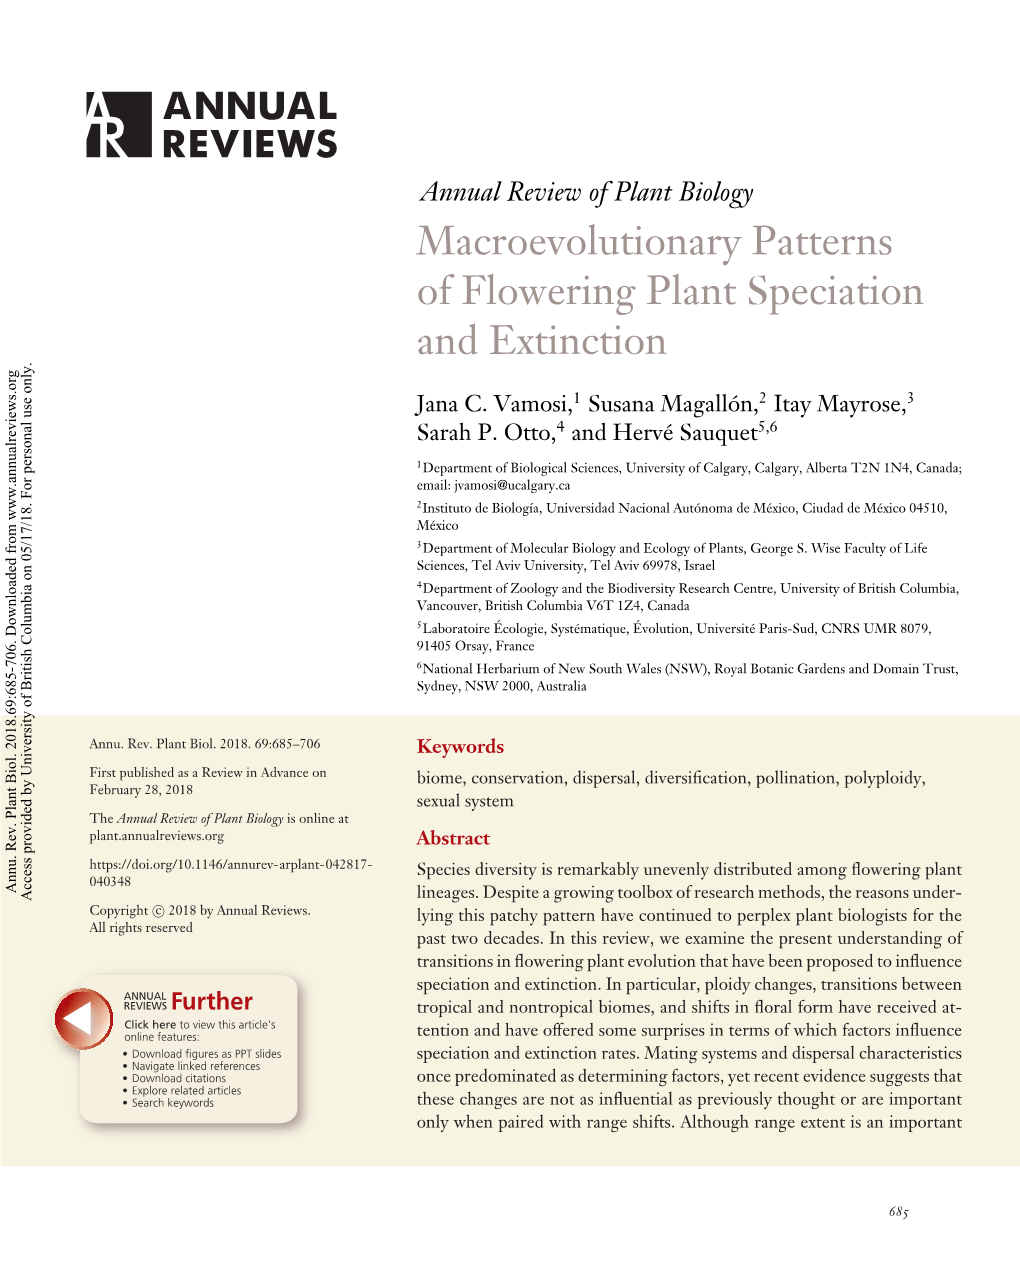 Macroevolutionary Patterns of Flowering Plant Speciation and Extinction